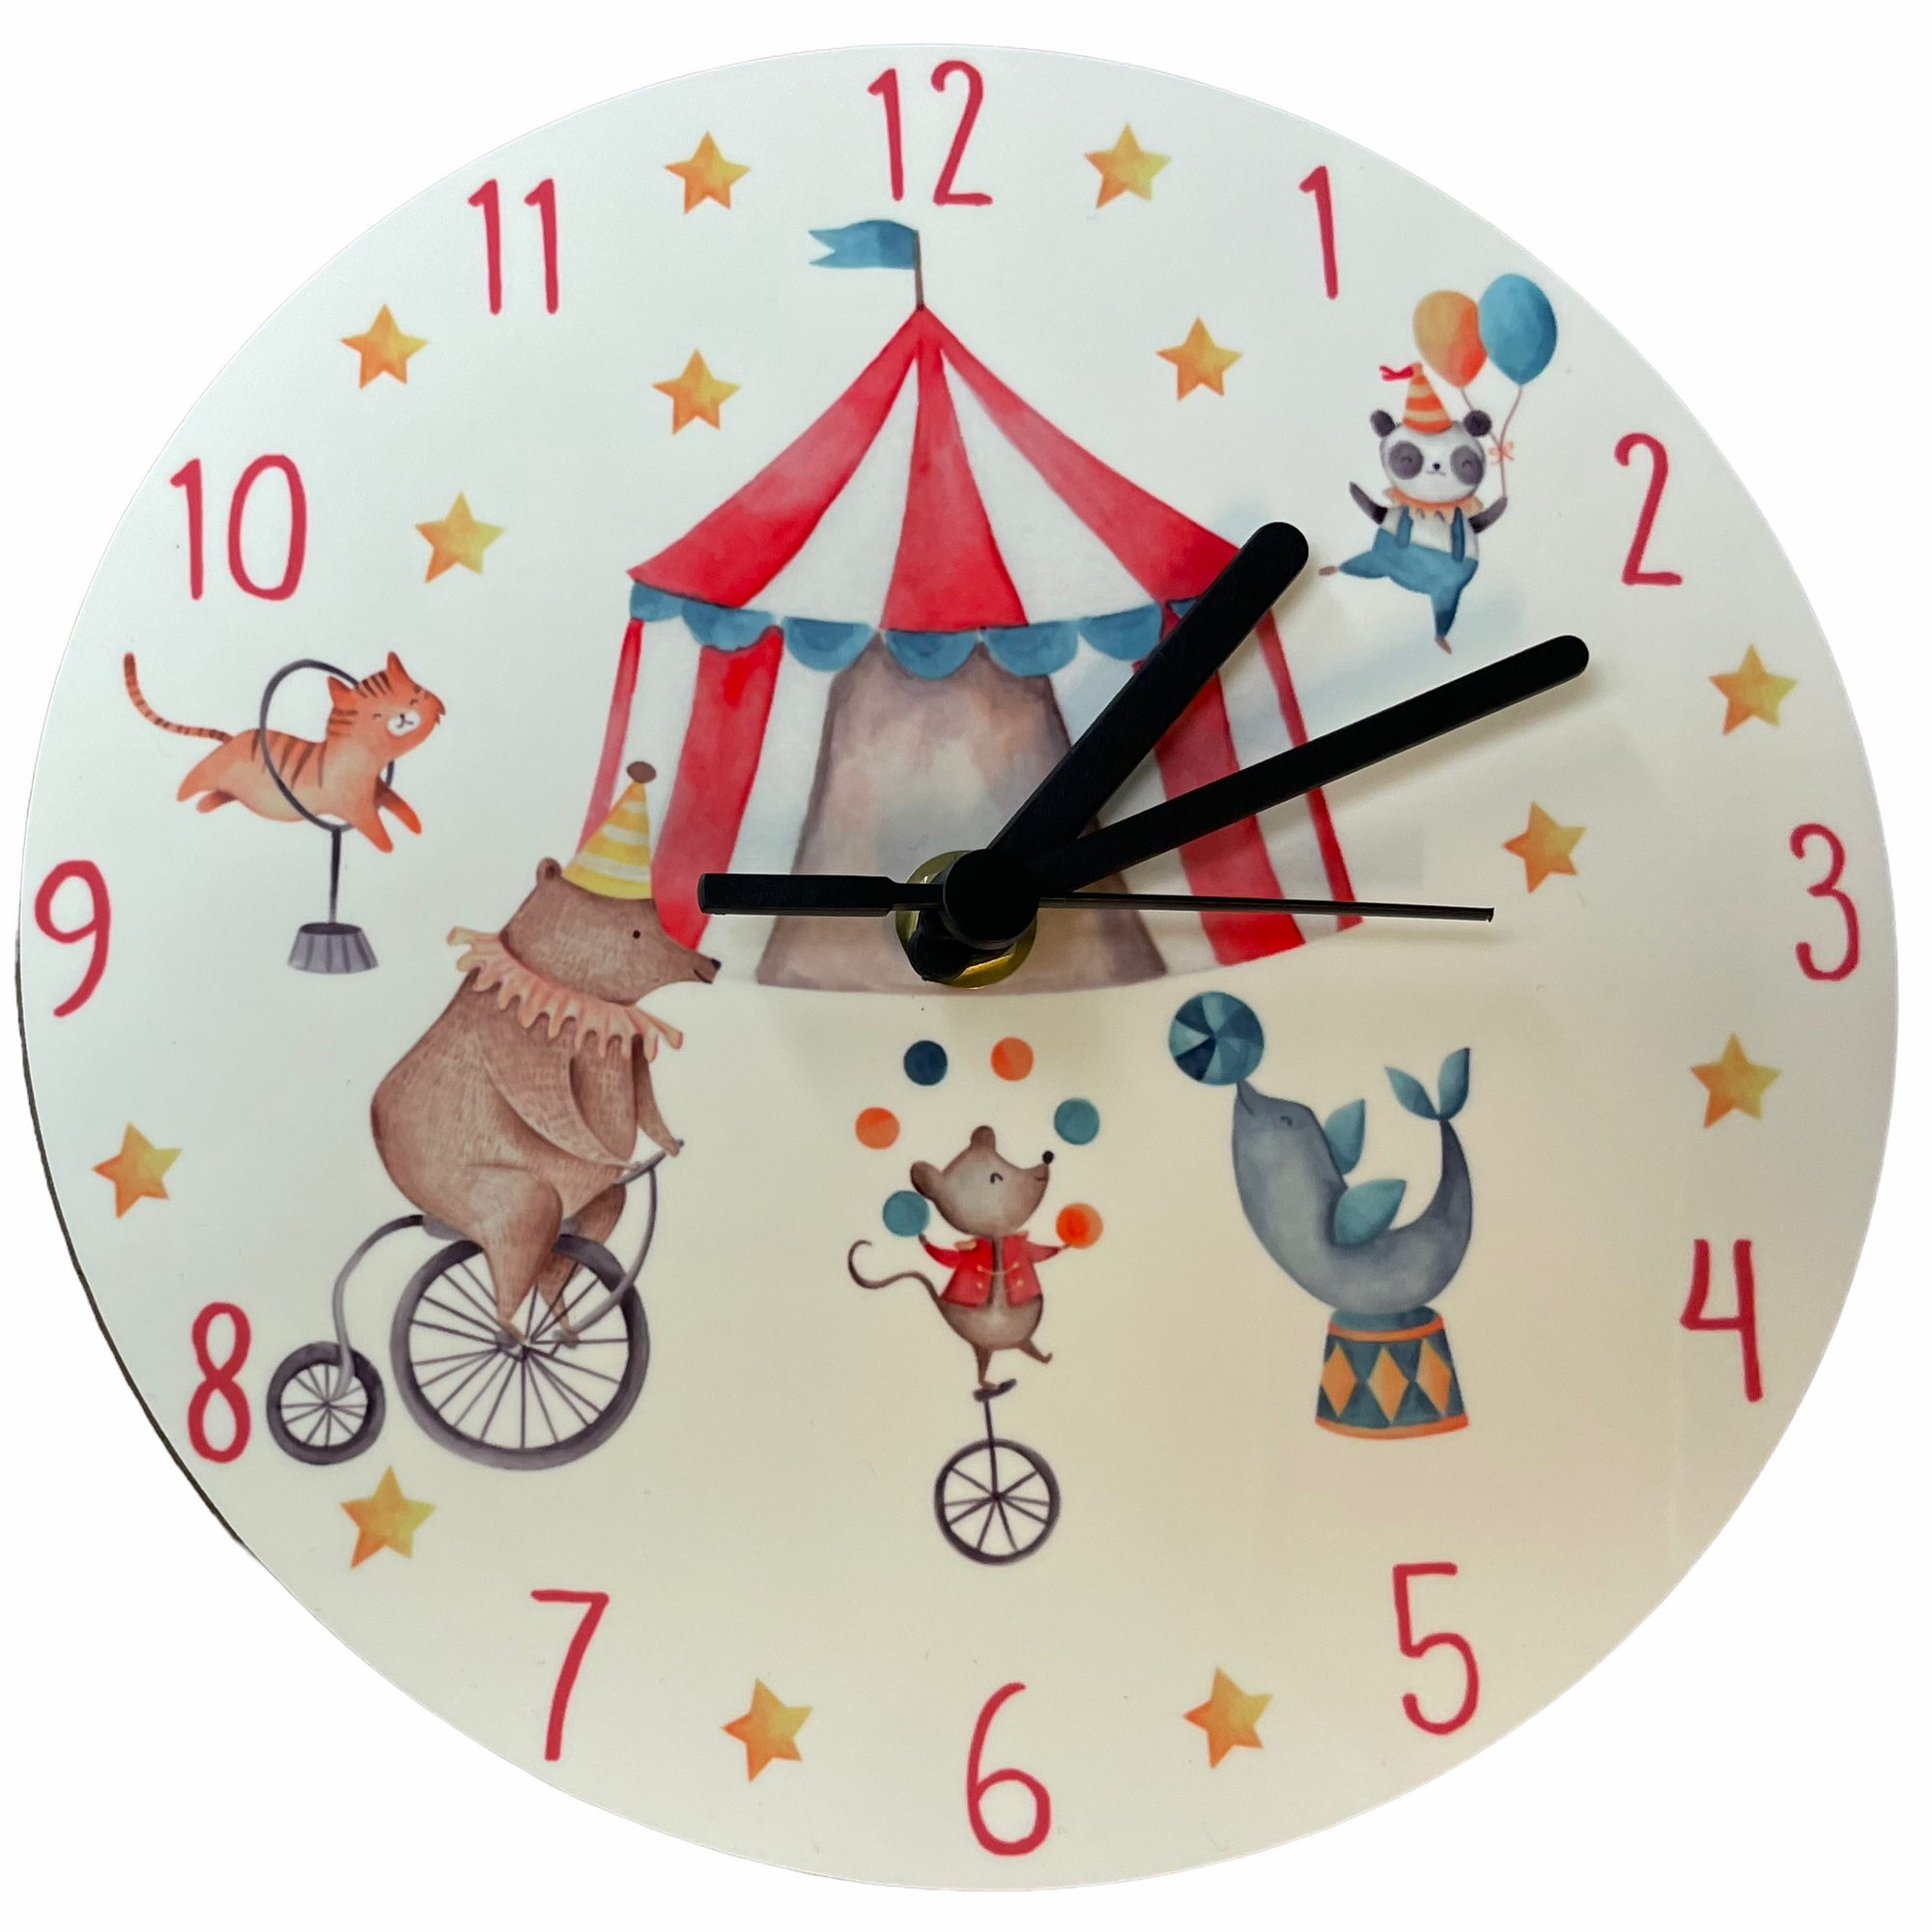 Circus themed childrens clock for a kids bedroom or nursery witha  bip top, bear, mouse, seal, cat and panda with stars on teh clock face. Black hands with second hand. From Mustard and Gray